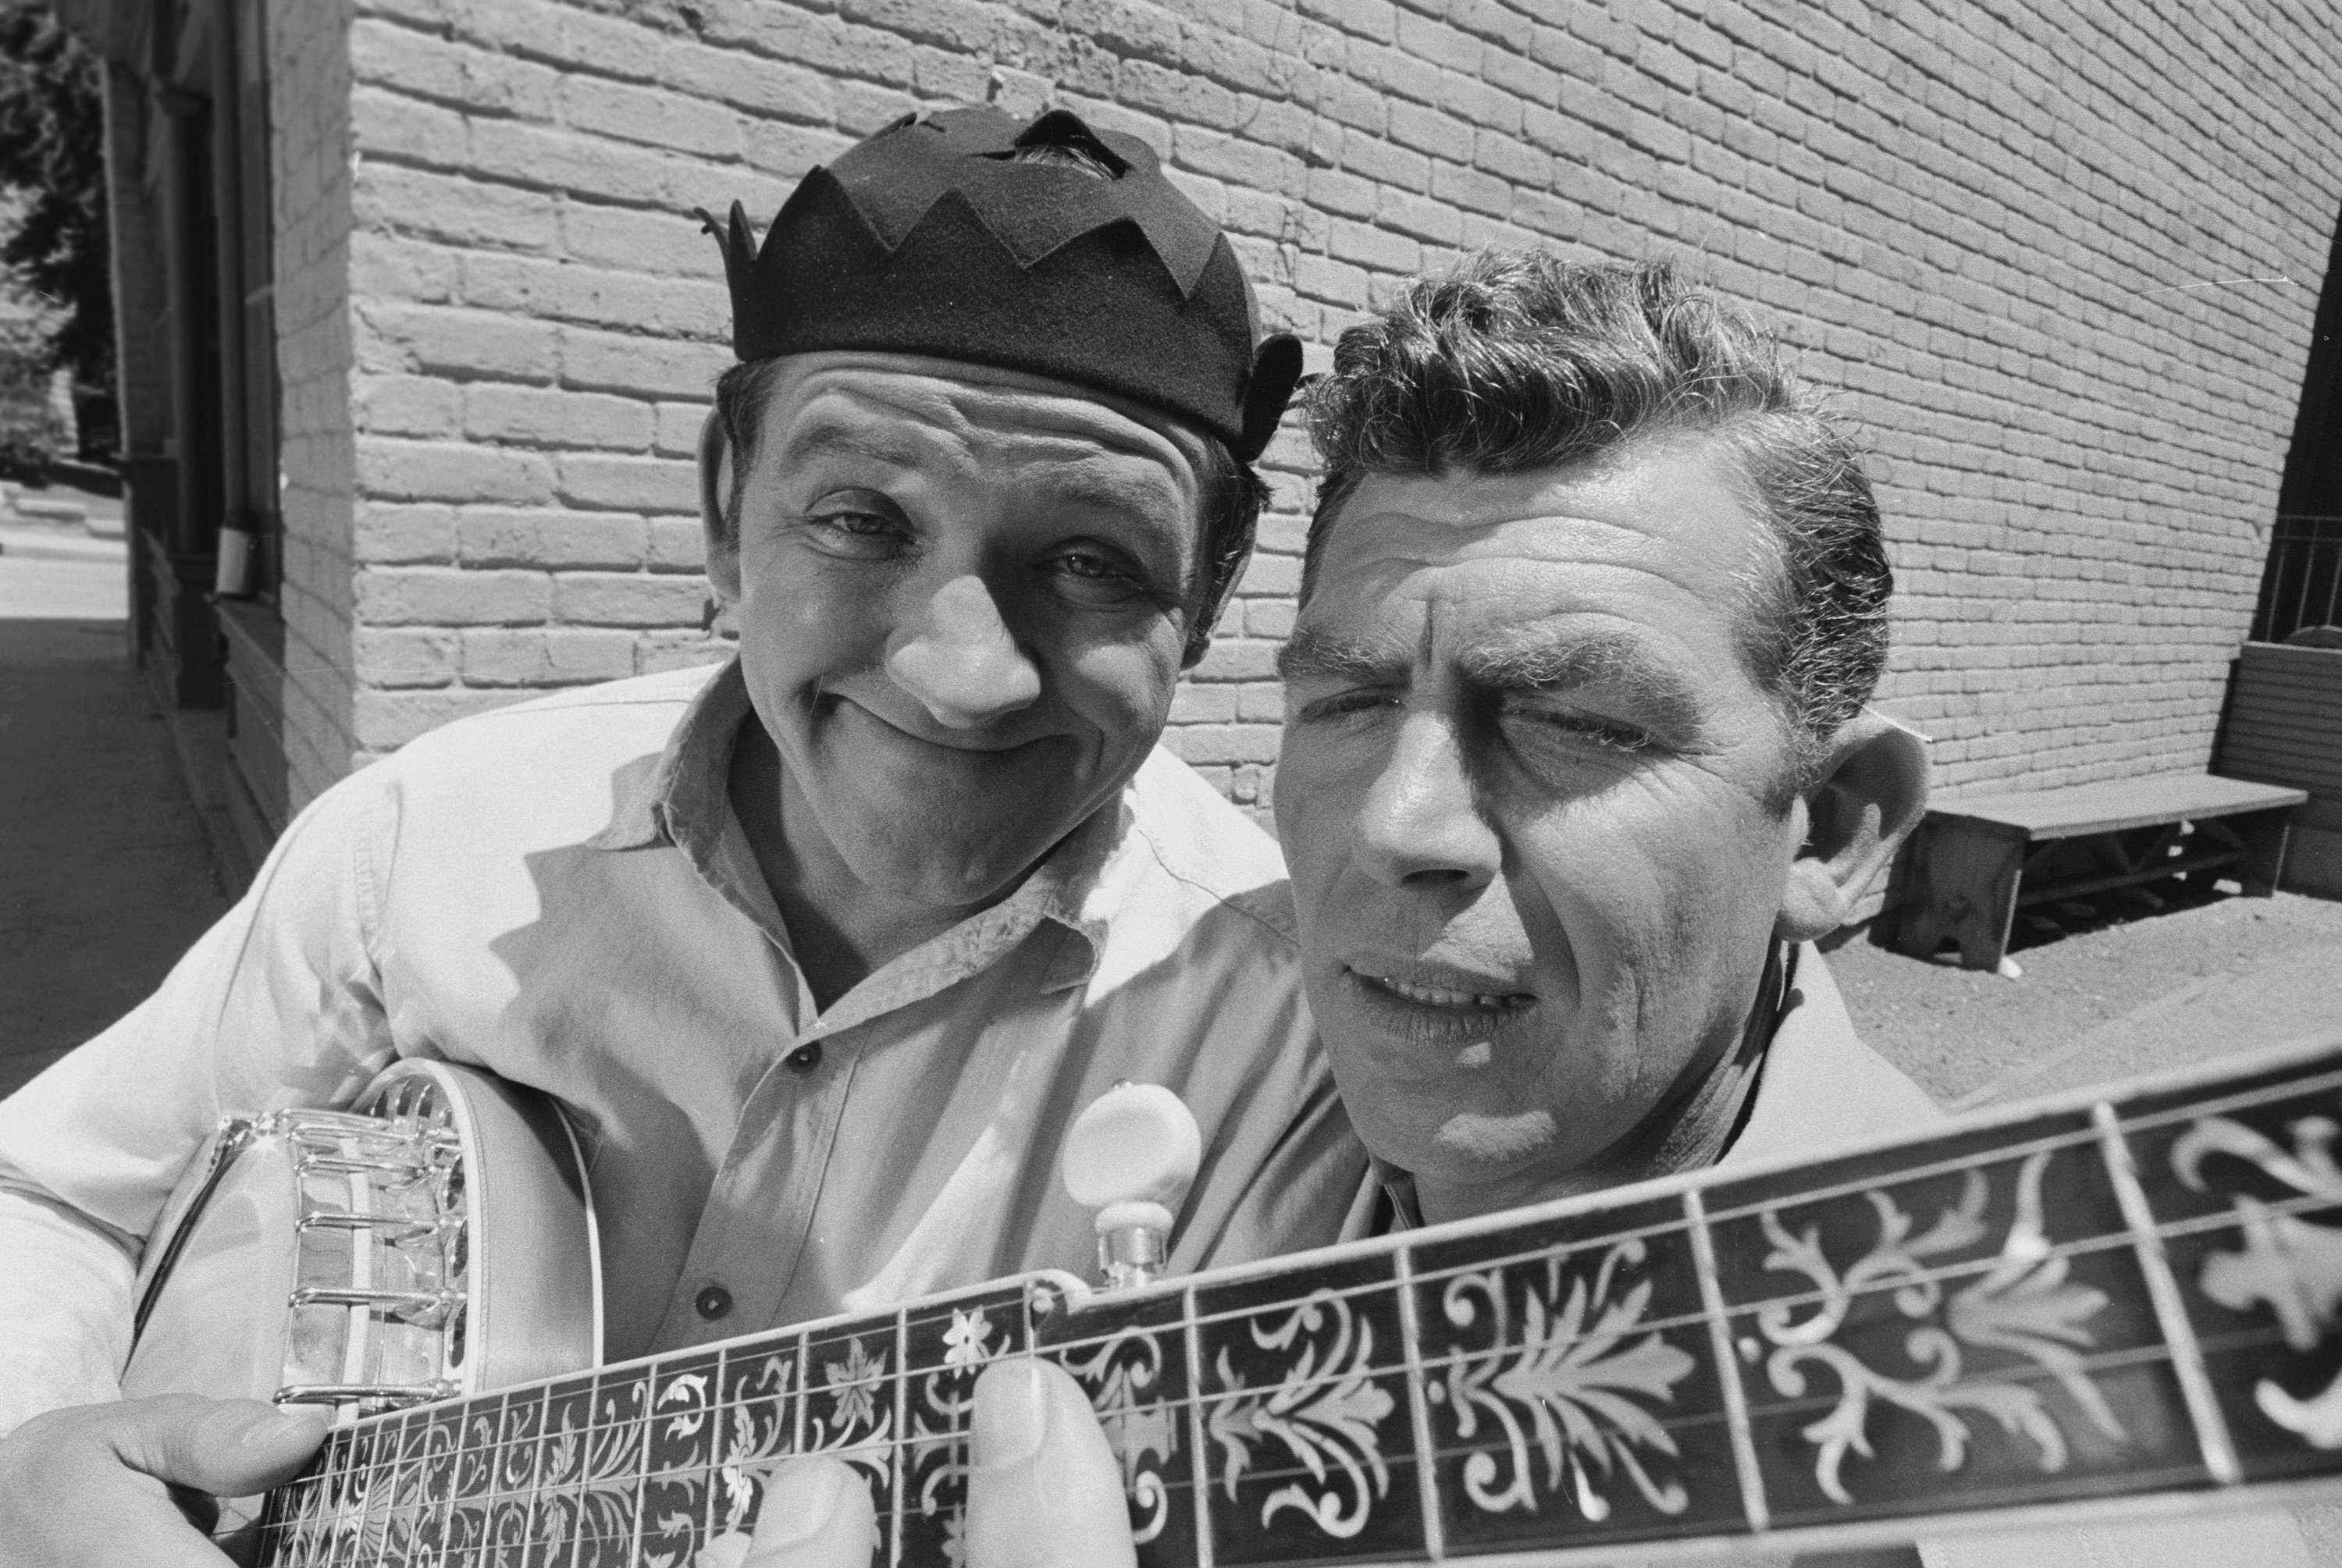 George Lindsey as Goober Pyle, left, with actor Andy Griffith on the set of 'The Andy Griffith Show'